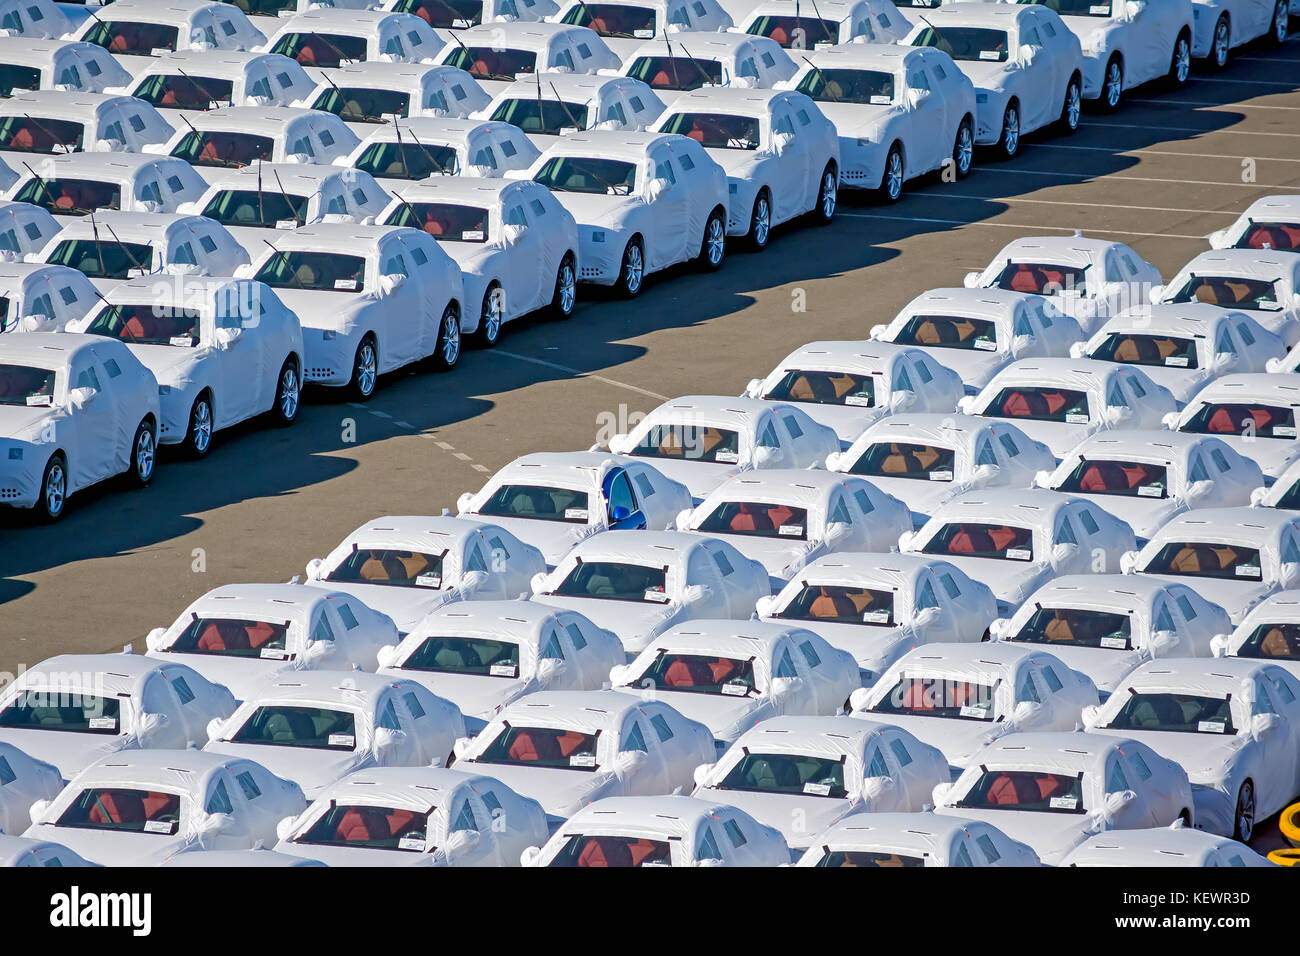 Above columns of white autos that all look alike. Stock Photo